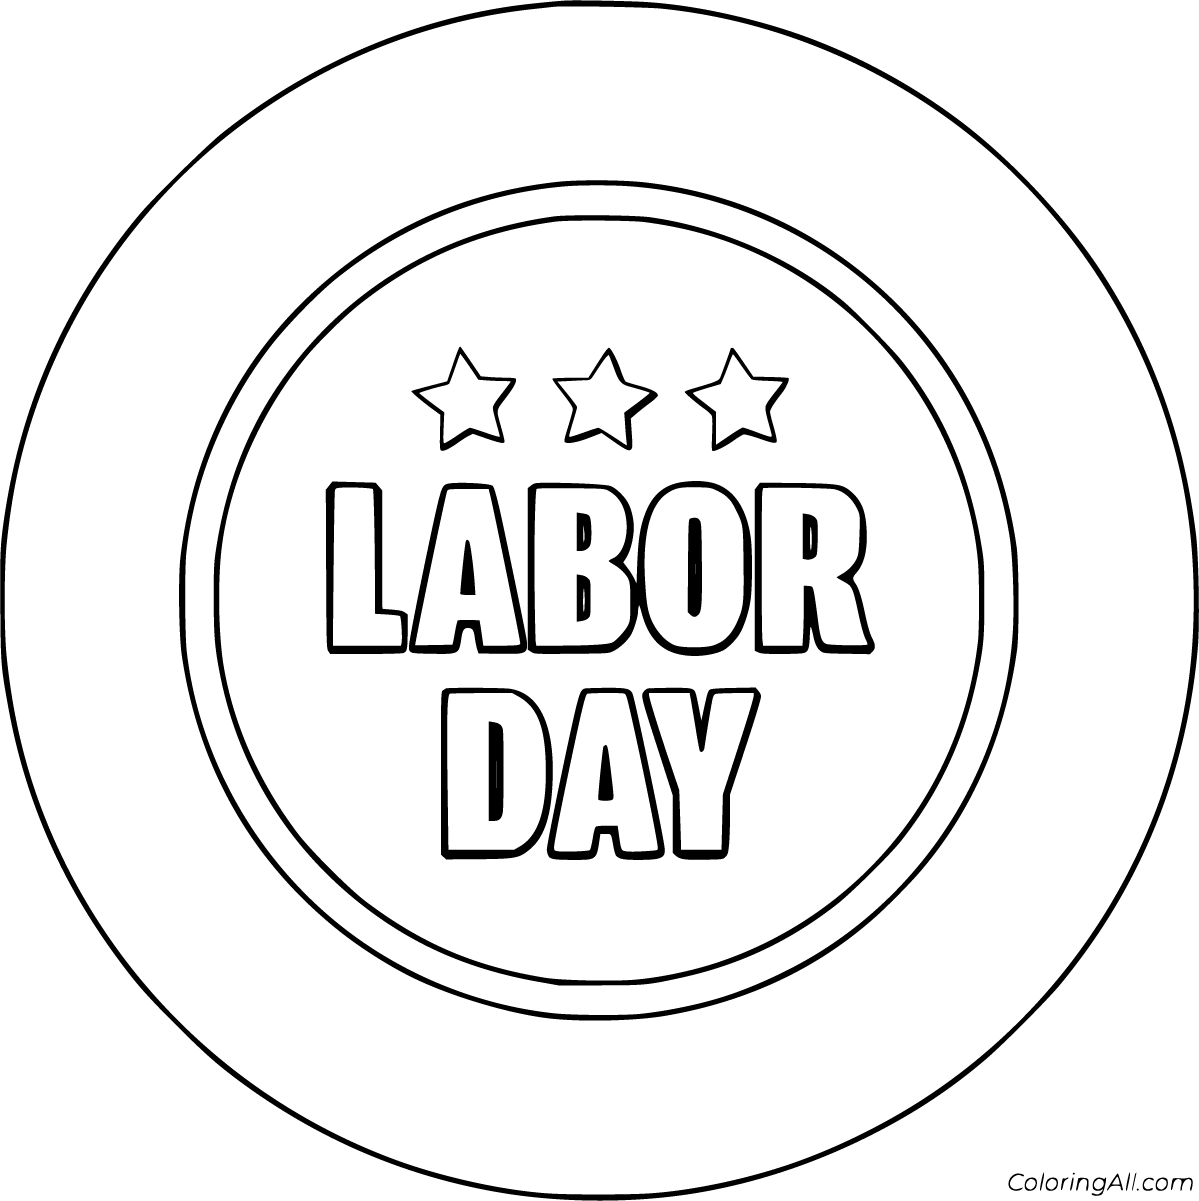 Free printable labor day coloring pages in vector format easy to print from any device and automatically fit any â coloring pages labour day happy labor day